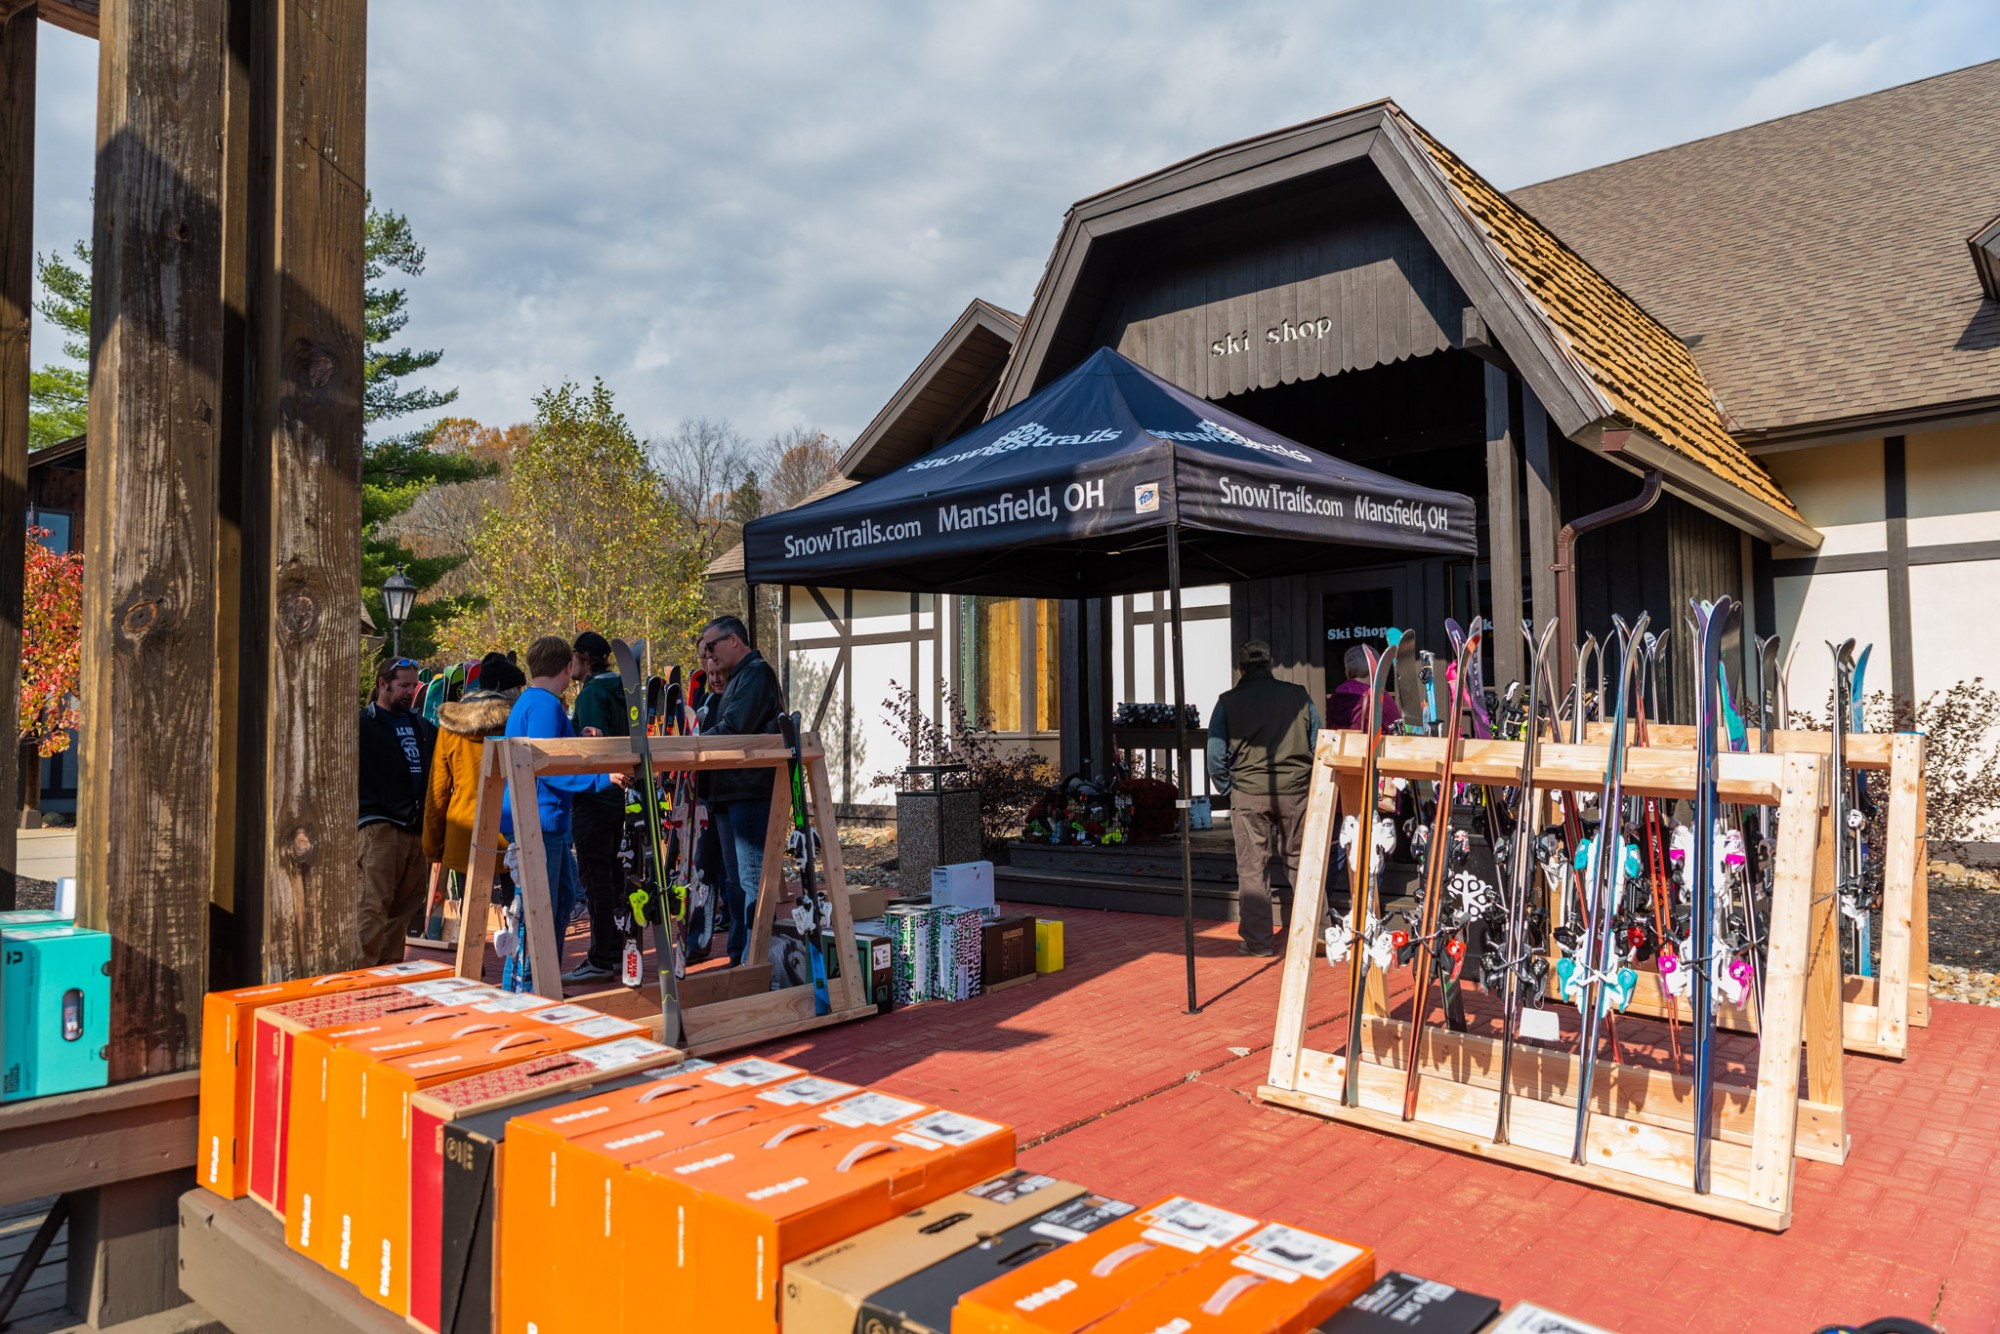 Great Deals on Skis and Snowboards at Snow Trails Ski Patrol Swap Weekend